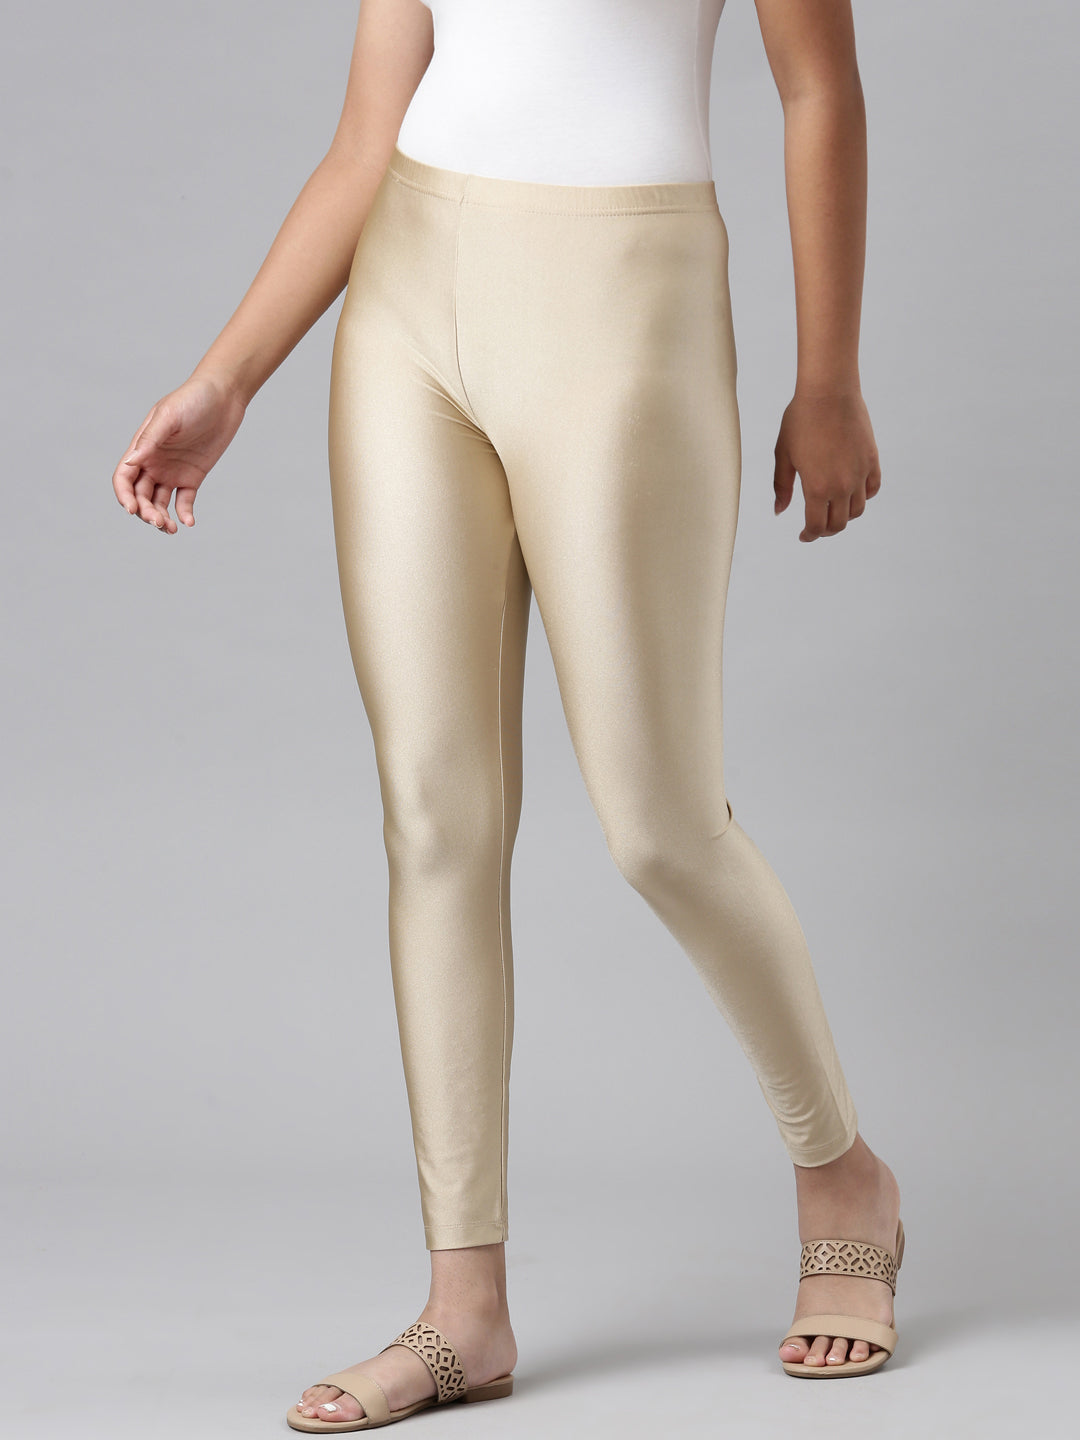 GO COLORS Women Rusts Mid Rise Solid Nylon Shimmer Leggings - S :  Amazon.in: Fashion